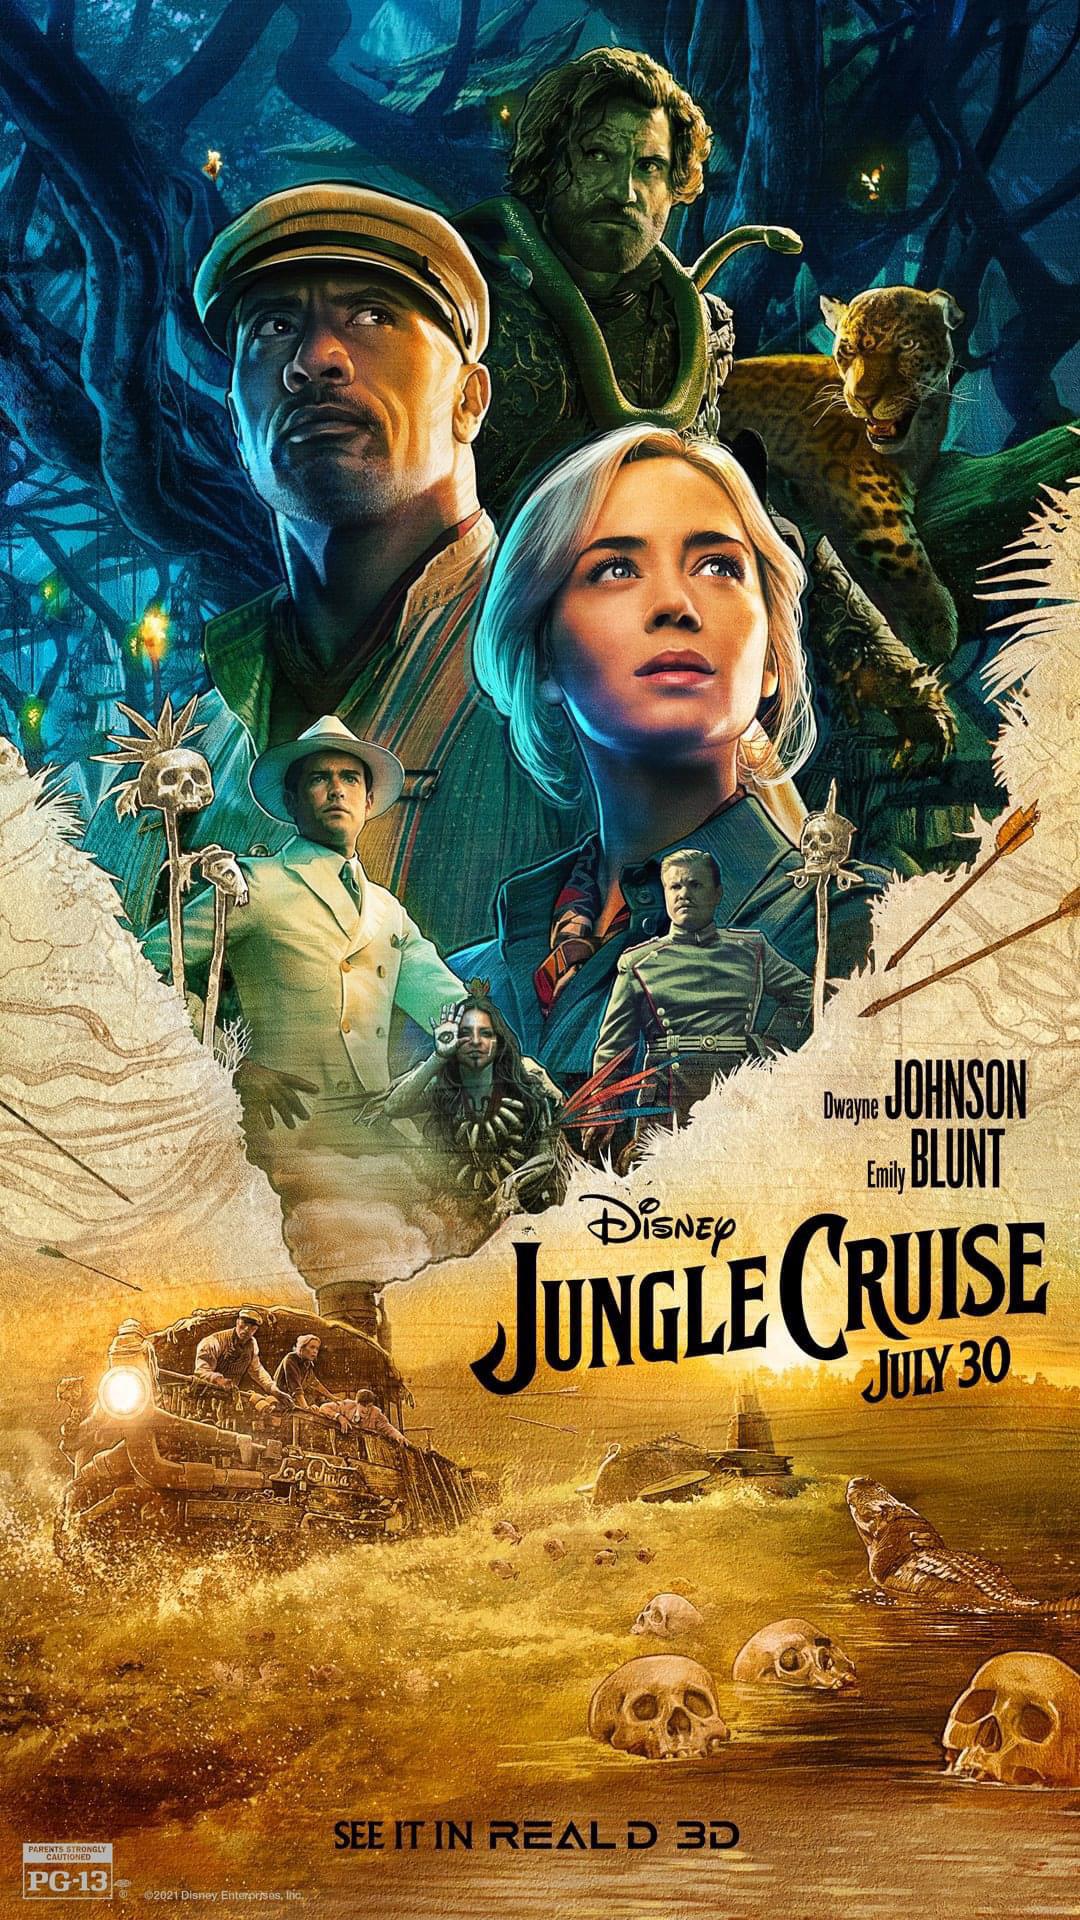 Disney’s Jungle Cruise Review